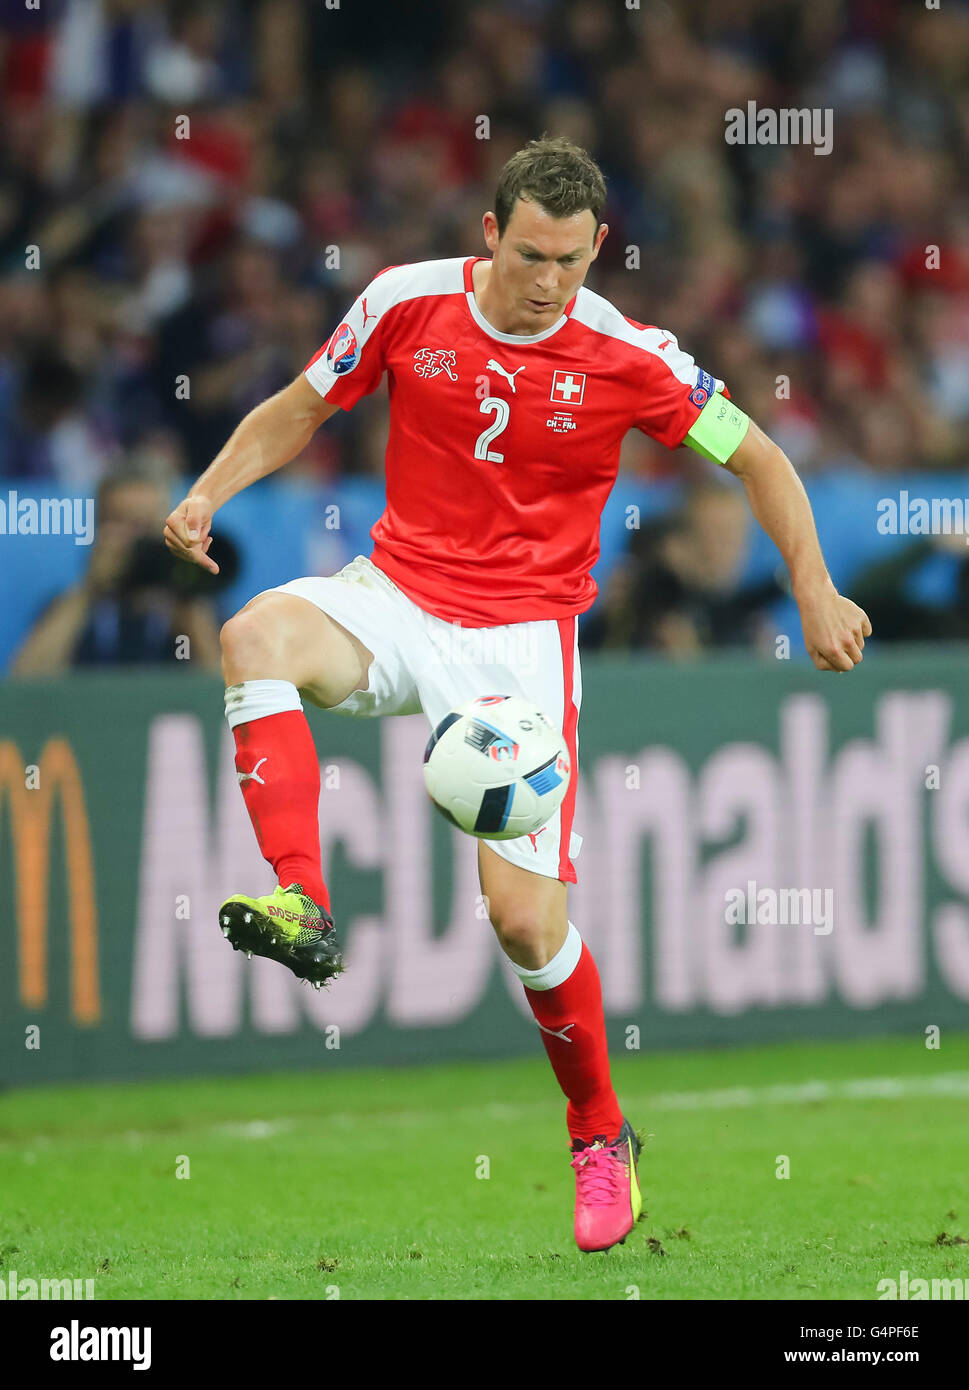 Lille, France. 19th June, 2016. Stephan LICHTSTEINER, SUI 2 drives the  ball, action, full-size, FRANCE - SWITZERLAND 0-0 Group A ,Football  European Championships EURO at June 19, 2016 in Lille, France. Fussball,